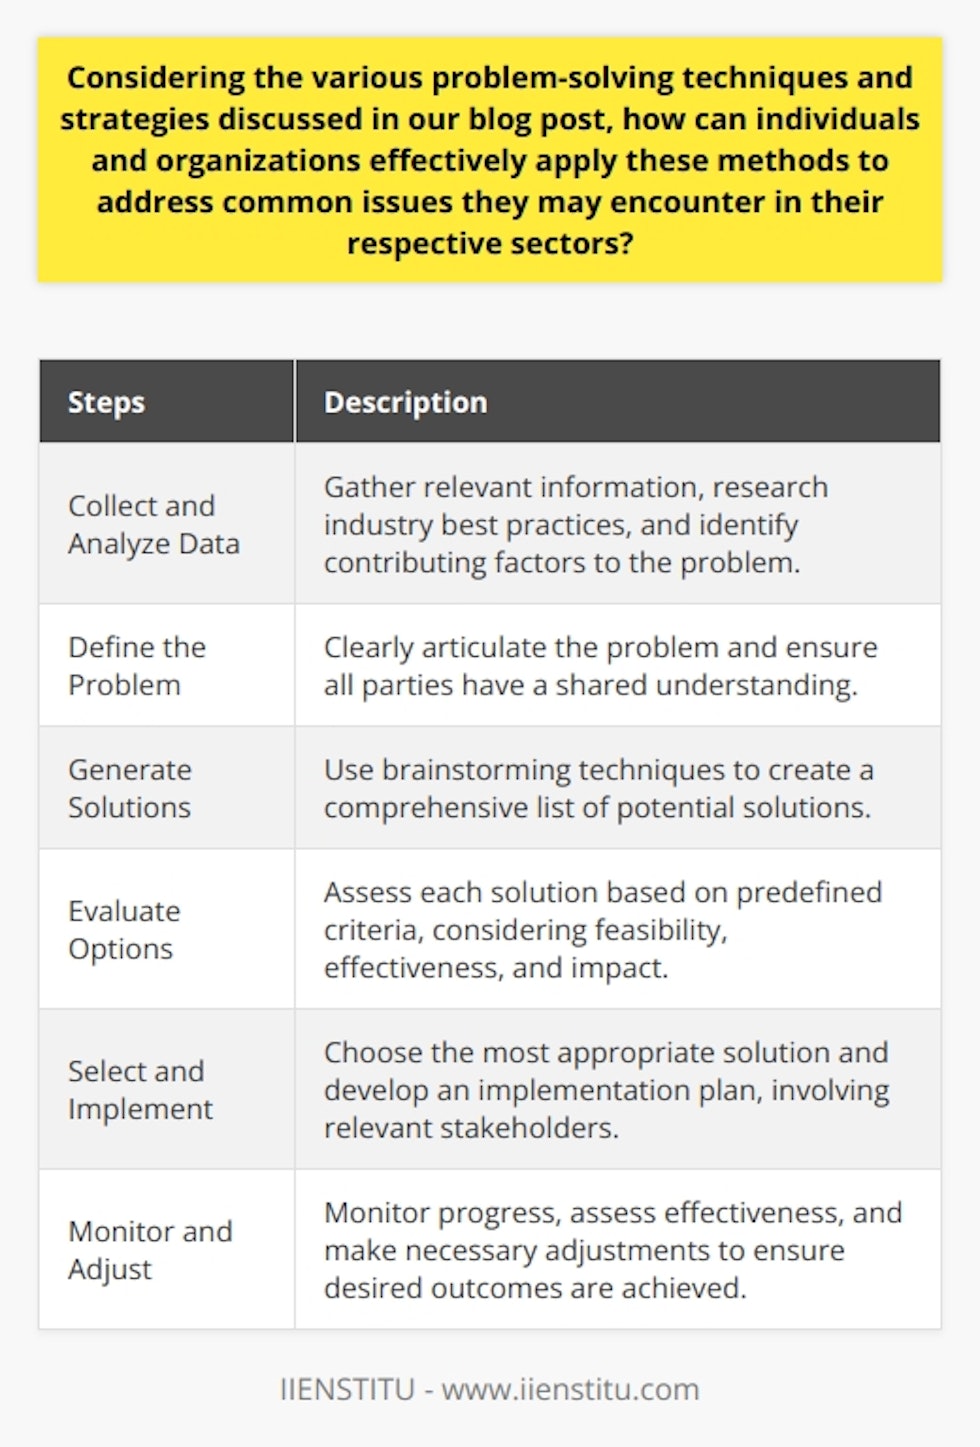 To begin with, individuals and organizations need to collect and analyze relevant data related to the problem they are facing. This could include gathering information about previous similar issues, researching industry best practices, and identifying any existing internal or external factors that might be contributing to the problem.Next, they should define the problem clearly and ensure that all parties involved have a shared understanding of the issue. This step is crucial because it lays the foundation for generating effective solutions. By identifying the root cause of the problem, individuals and organizations can focus their efforts on addressing the underlying issue rather than just the symptoms.Once the problem has been clearly defined, individuals and organizations should employ brainstorming techniques to generate a comprehensive list of possible solutions. It is important to encourage creativity and open-mindedness during this stage, as sometimes the best solutions may seem unconventional or outside of the box. By involving a diverse range of perspectives and expertise, parties can consider various approaches to tackle the problem.After generating a list of potential solutions, individuals and organizations should evaluate each option based on a set of predefined criteria. This evaluation process helps determine the feasibility, effectiveness, and sustainability of each solution. It is important to consider both the short-term and long-term implications of each option and prioritize those that offer the highest potential impact.Once the evaluation is complete, individuals and organizations should select the most appropriate solution and develop an implementation plan. This plan should outline the necessary steps, resources, and timelines required to effectively address the problem. It is crucial to involve all relevant stakeholders and ensure clear communication channels to facilitate a smooth implementation process.Throughout the implementation phase, individuals and organizations should closely monitor the progress and assess the effectiveness of the chosen solution. This allows for necessary adjustments and modifications to be made if required. By continuously reviewing the outcomes and gathering feedback, parties can ensure that the problem-solving approach remains relevant and effective.In conclusion, by applying a structured problem-solving approach, individuals and organizations can effectively address common issues in their respective sectors. By identifying and understanding the specific challenges, employing creative problem-solving techniques, evaluating alternatives, and implementing the most appropriate solution, they can overcome obstacles and achieve desired outcomes. Adapting these methods to the unique context of their sectors ensures that individuals and organizations approach problem-solving in a systematic and efficient manner.